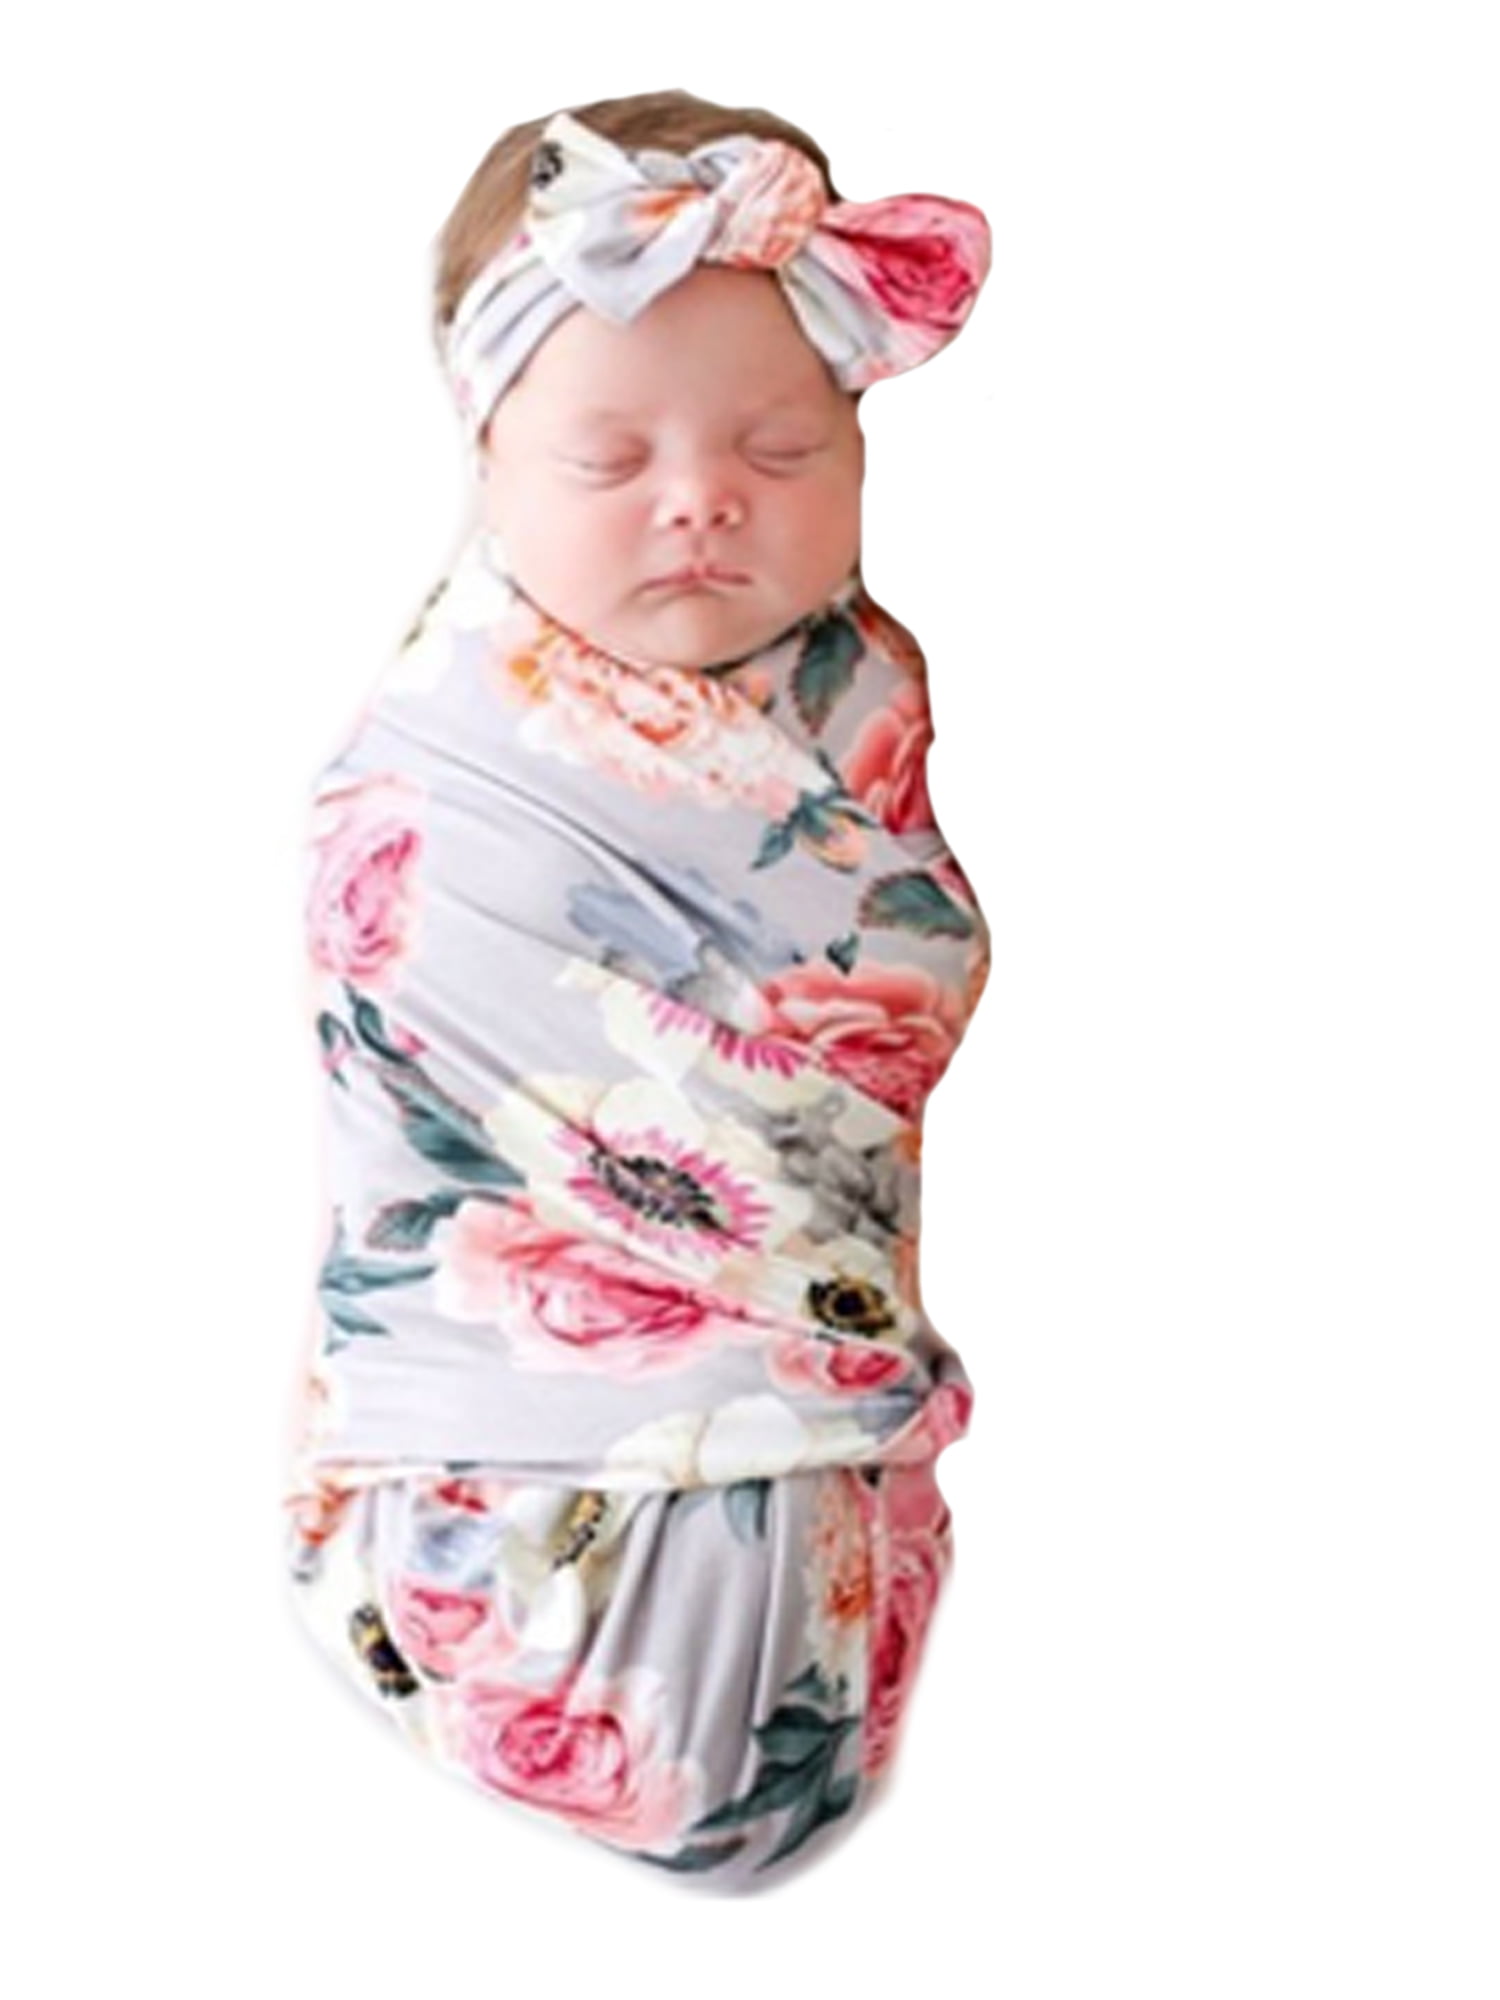 Newborn Receiving Blanket Headband Set Flower Print Baby Swaddle Cocoon Cotton Nursery Swaddle and Hair Band Set 3 Pack for Photograph Pack B Sleep Receiving Blankets